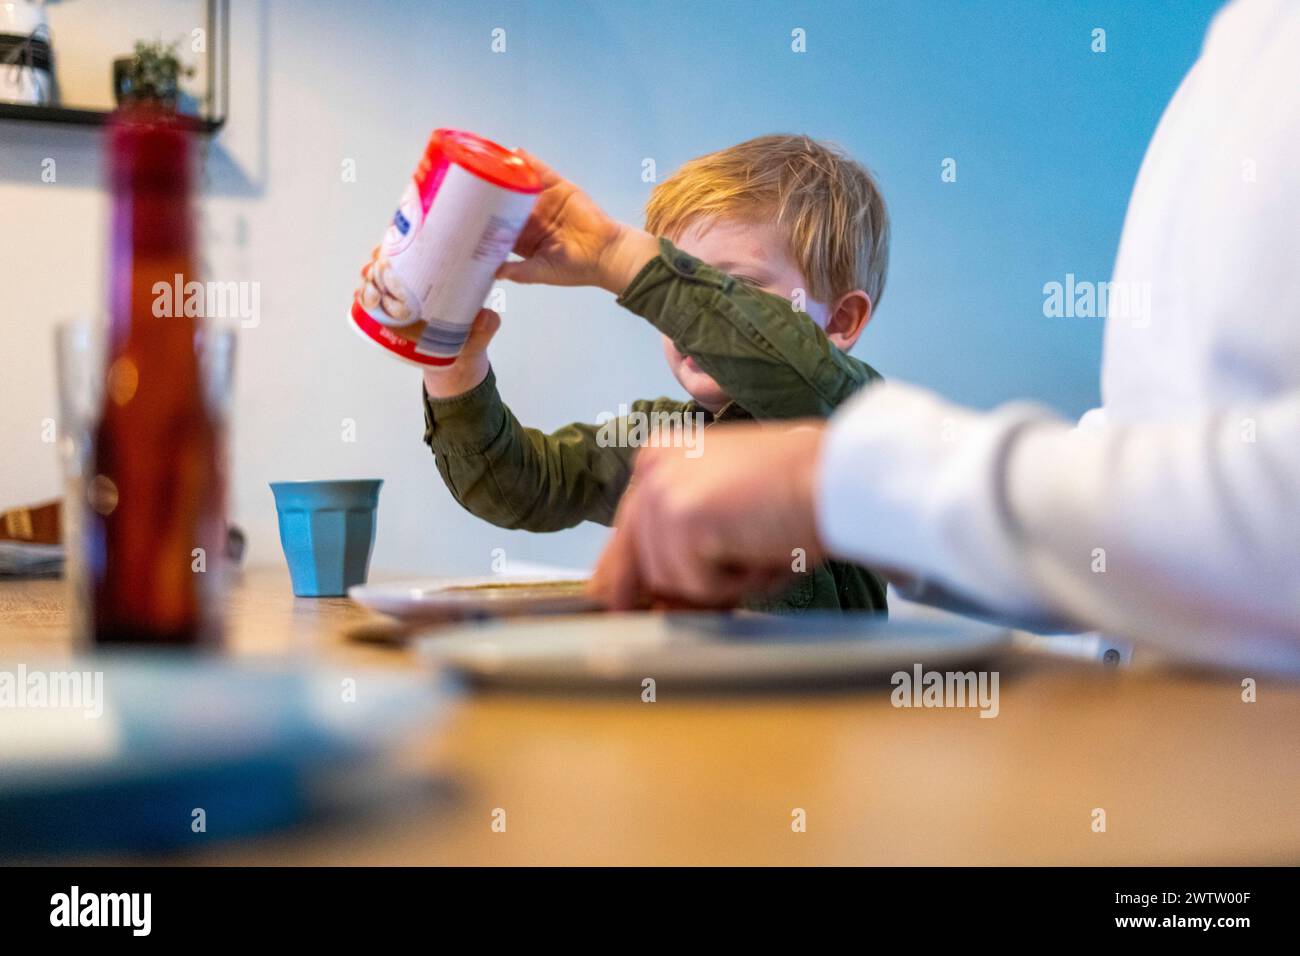 A curious child trying to pour ketchup onto their plate during a family meal. Stock Photo